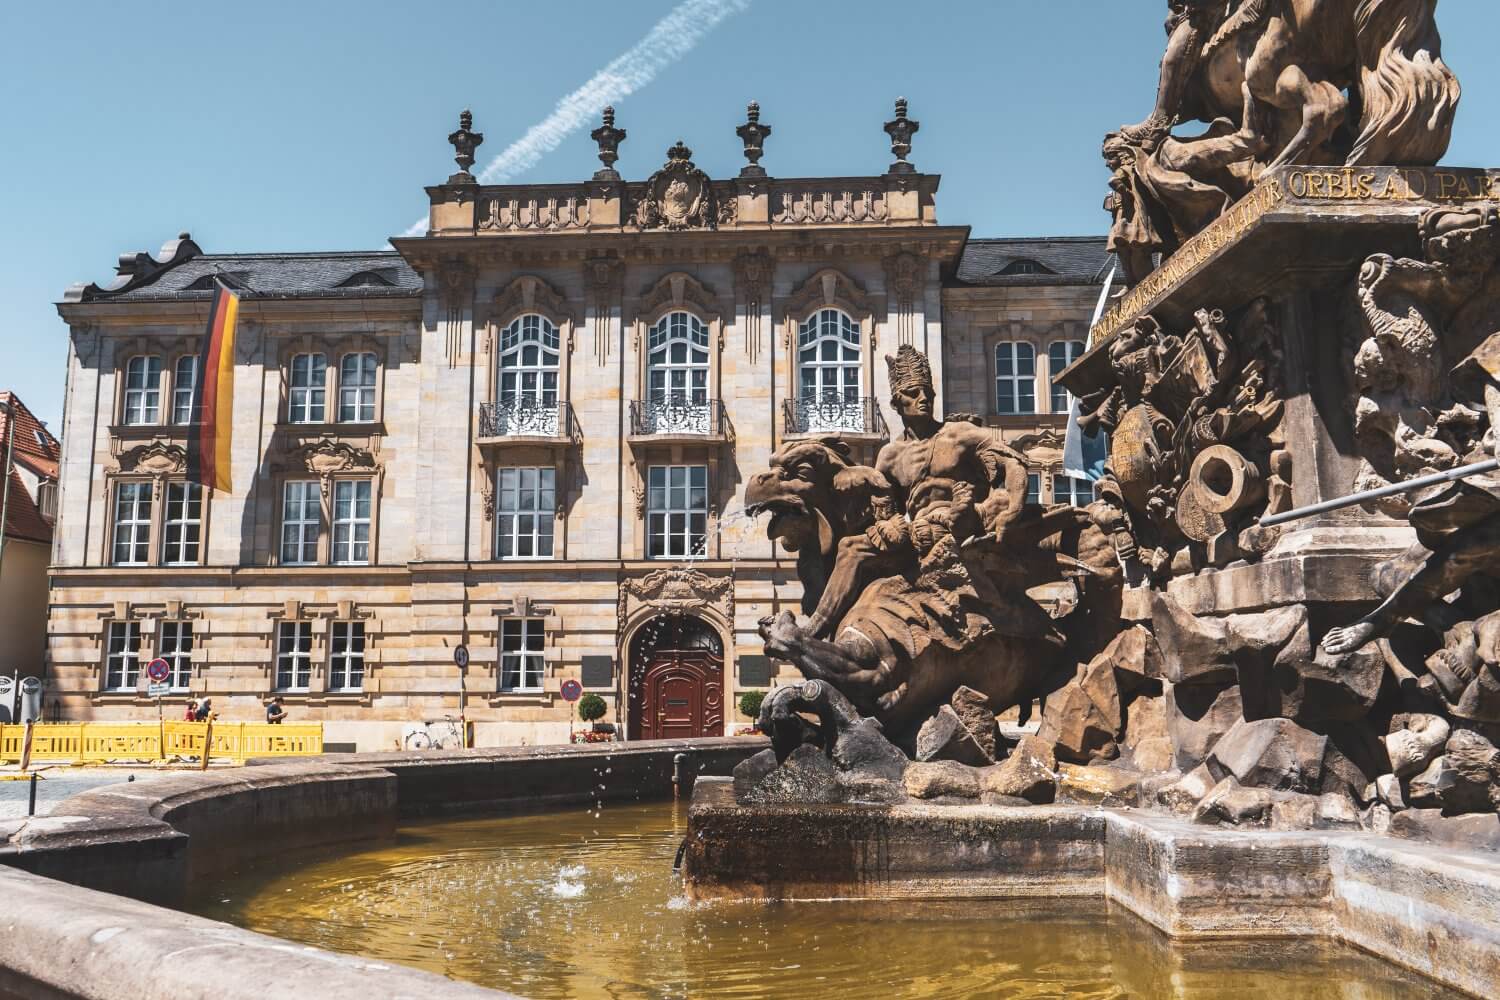 The New Palace in Bayreuth, Germany